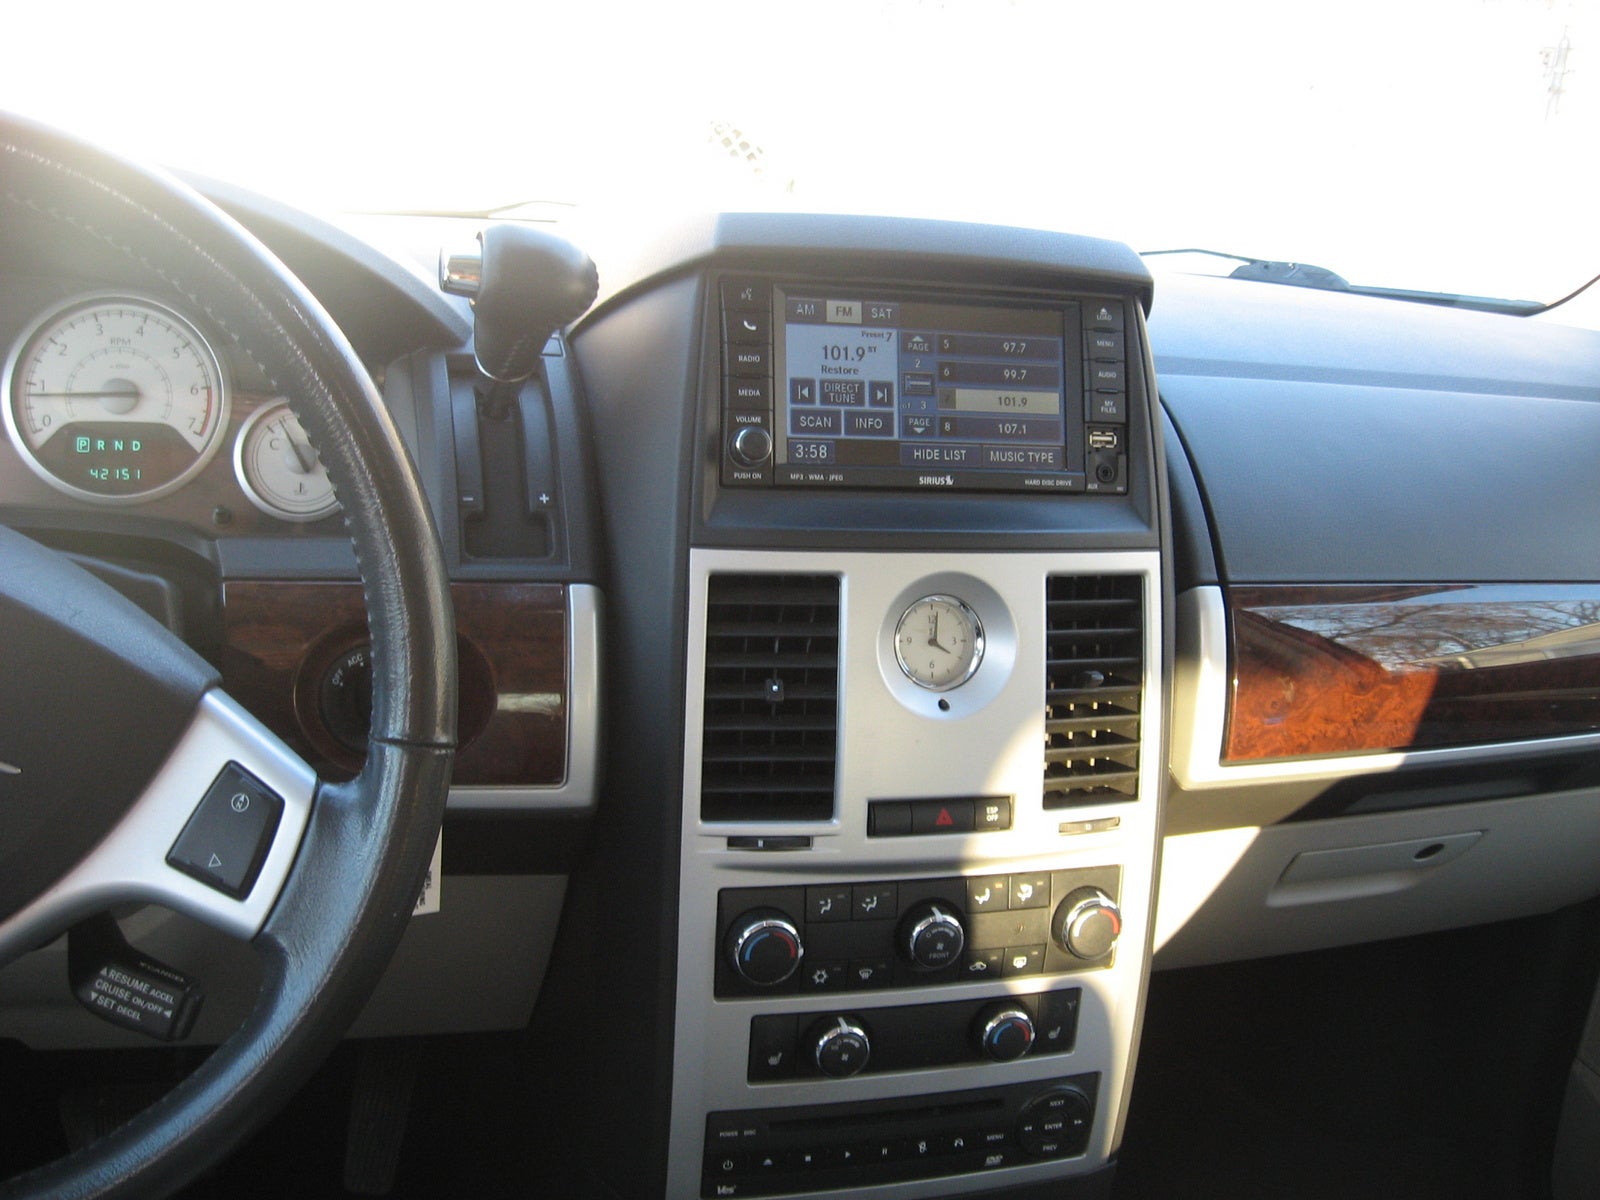 2010 Chrysler Town & Country - Pictures - CarGurus
